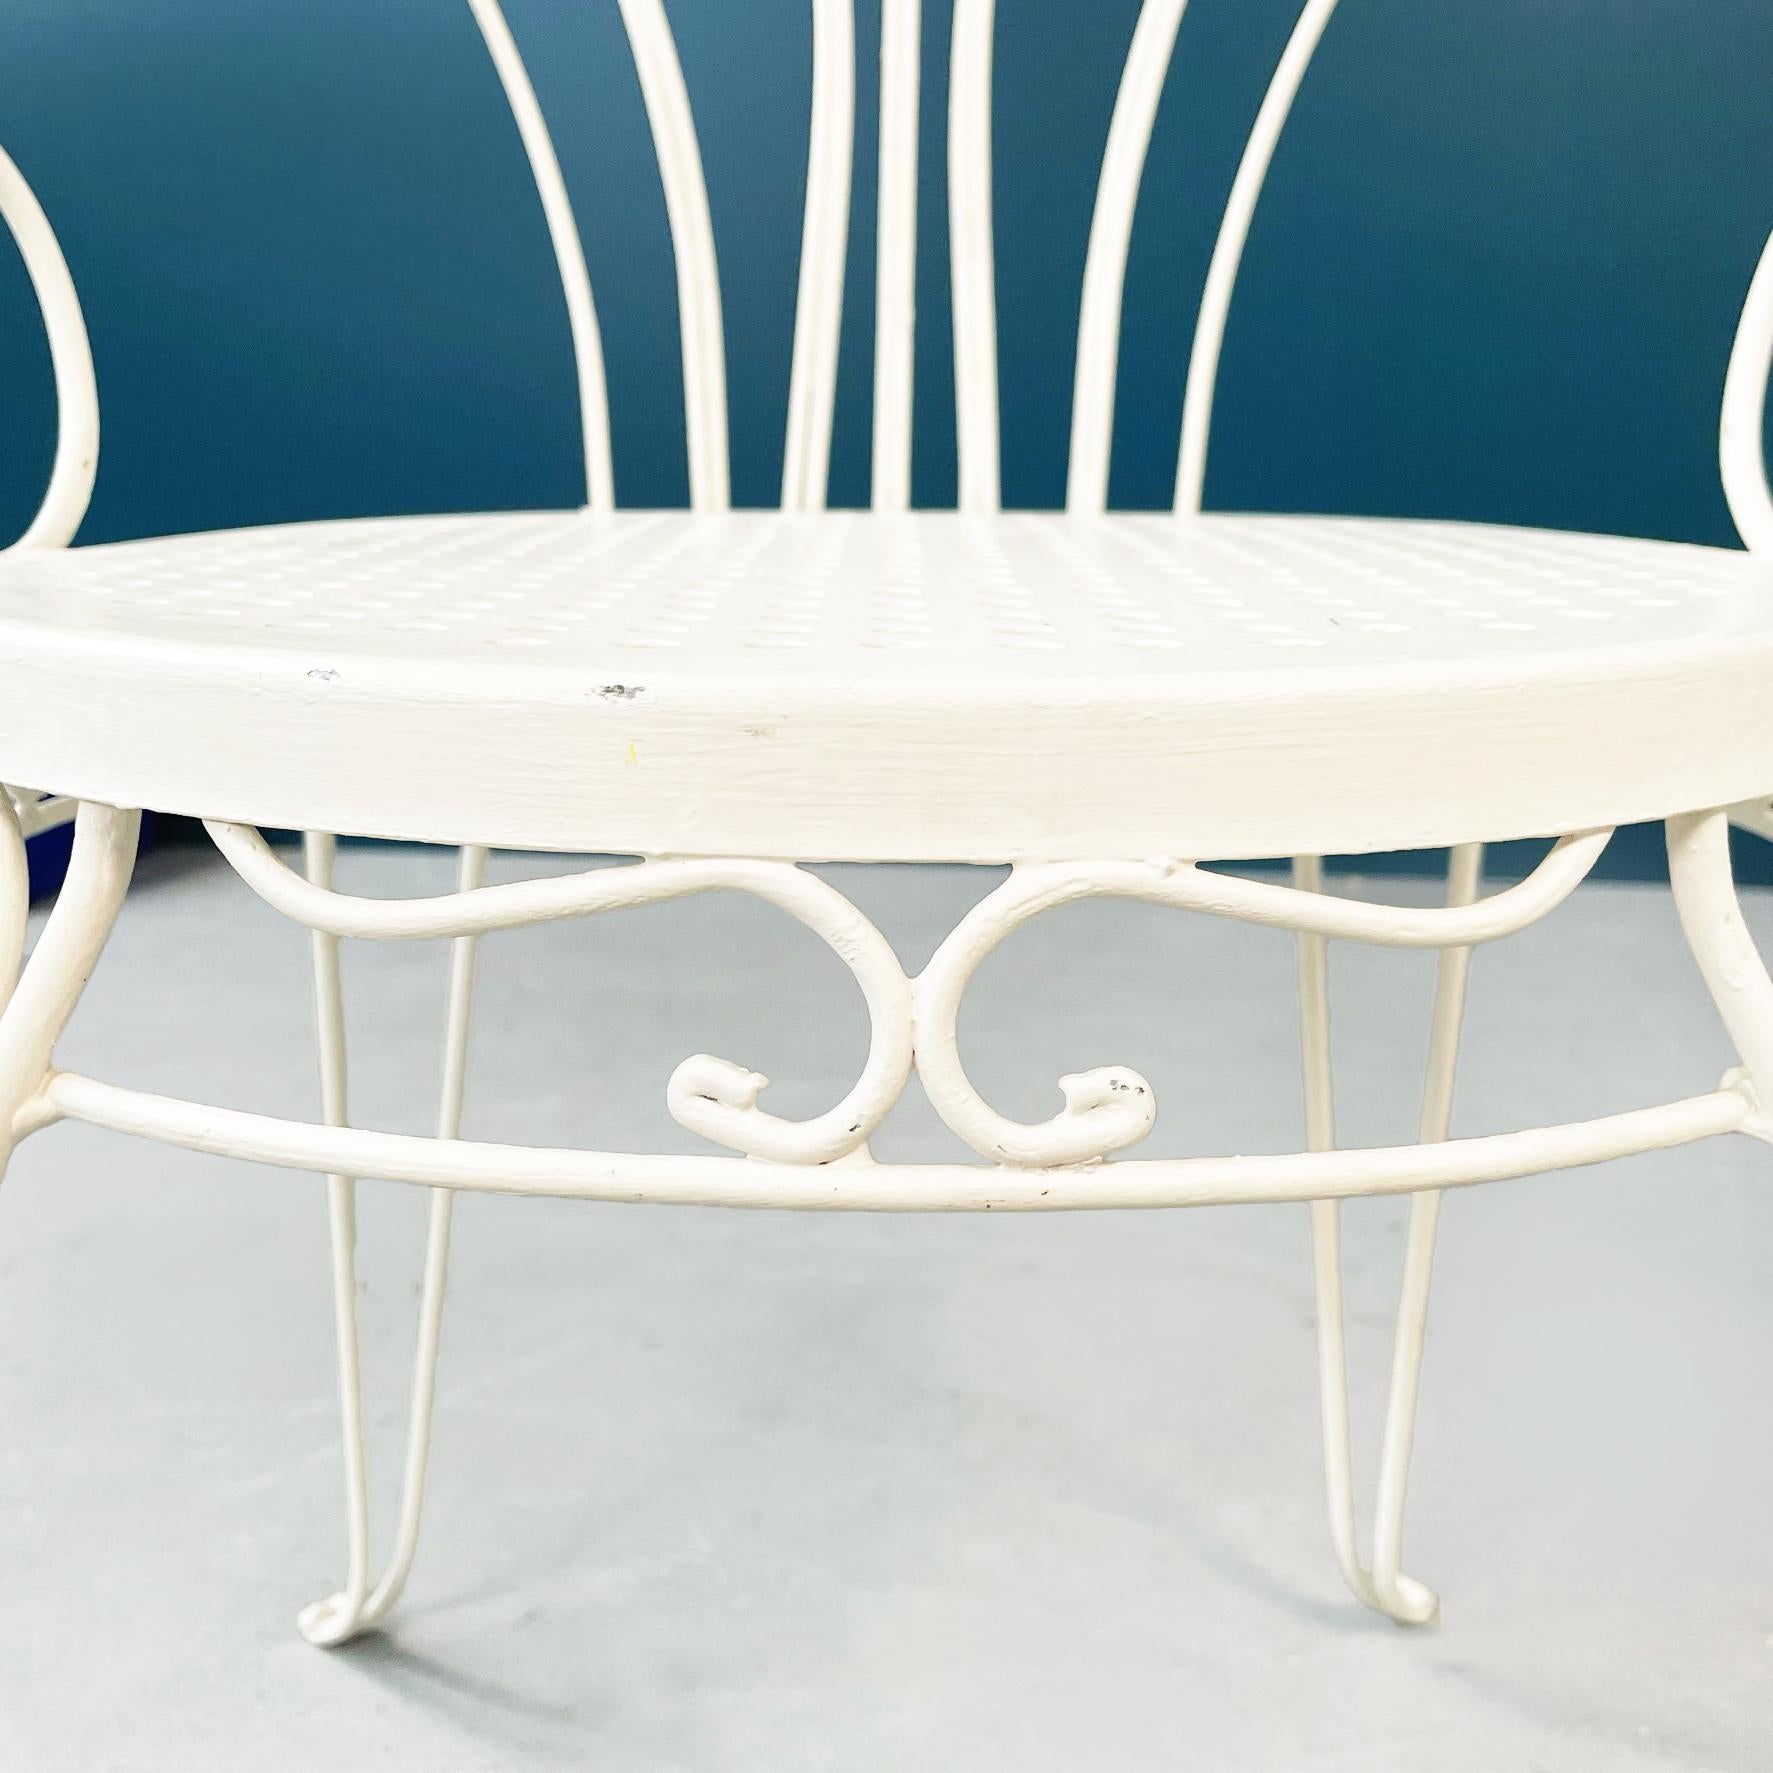 Italian Mid-Century Garden Chairs in White Wrought Iron with Curls, 1960s For Sale 1